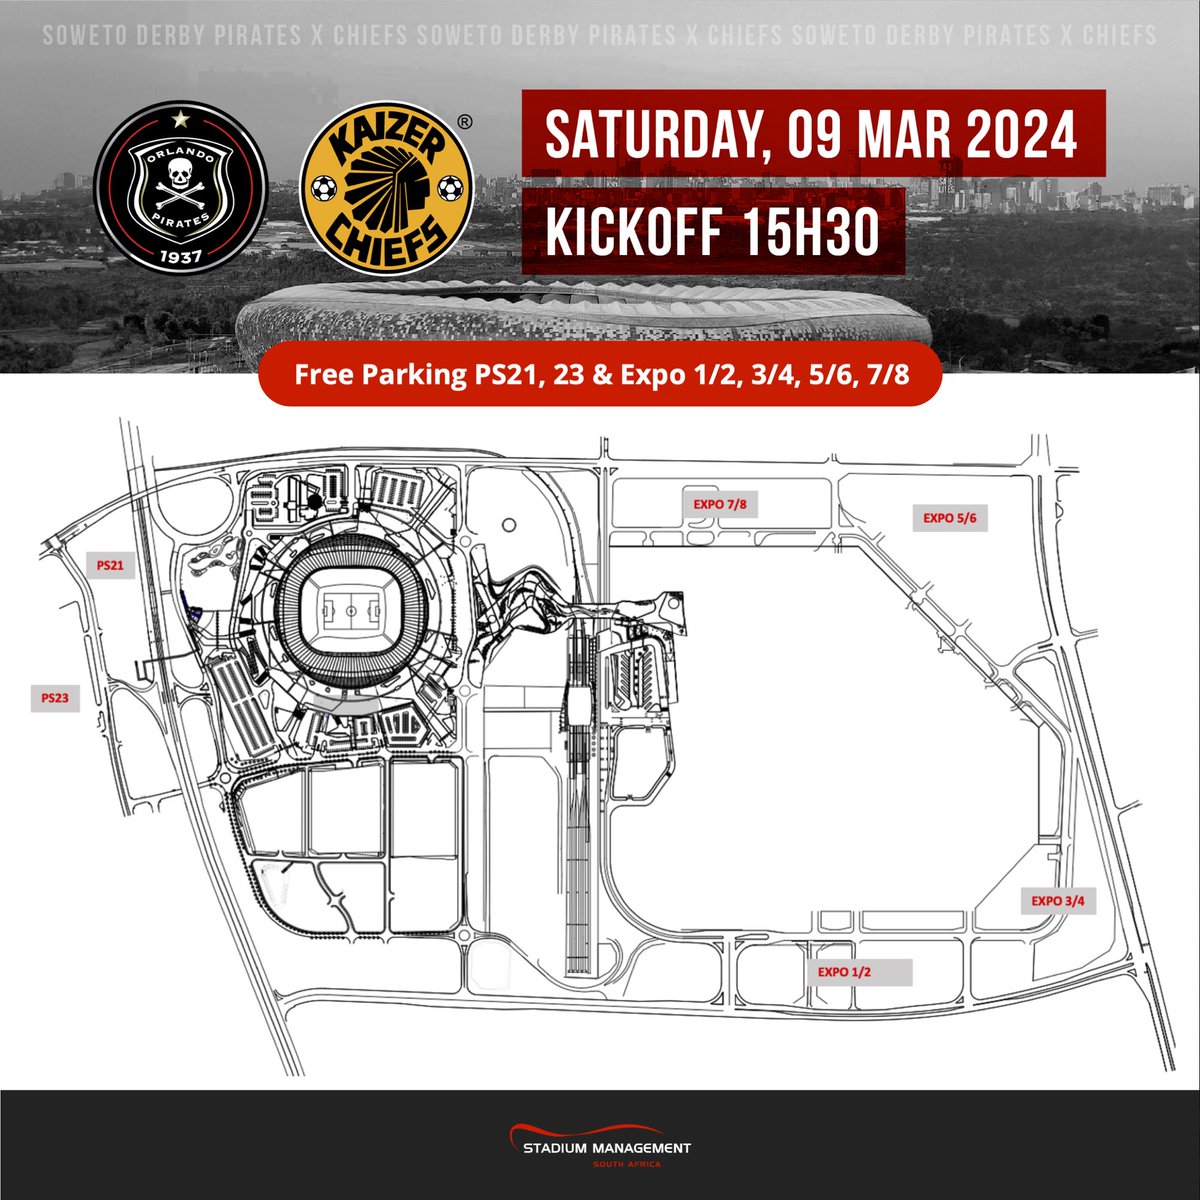 Pay attention to the infographic below for information on free parking at FNB Stadium for the Soweto Derby this Saturday. Free parking zones are: Expo 1/2, 3/4, 5/6, 7/8, PS21 & PS23. #smsa #fnbstadium #sowetoderby #dstvpremiership